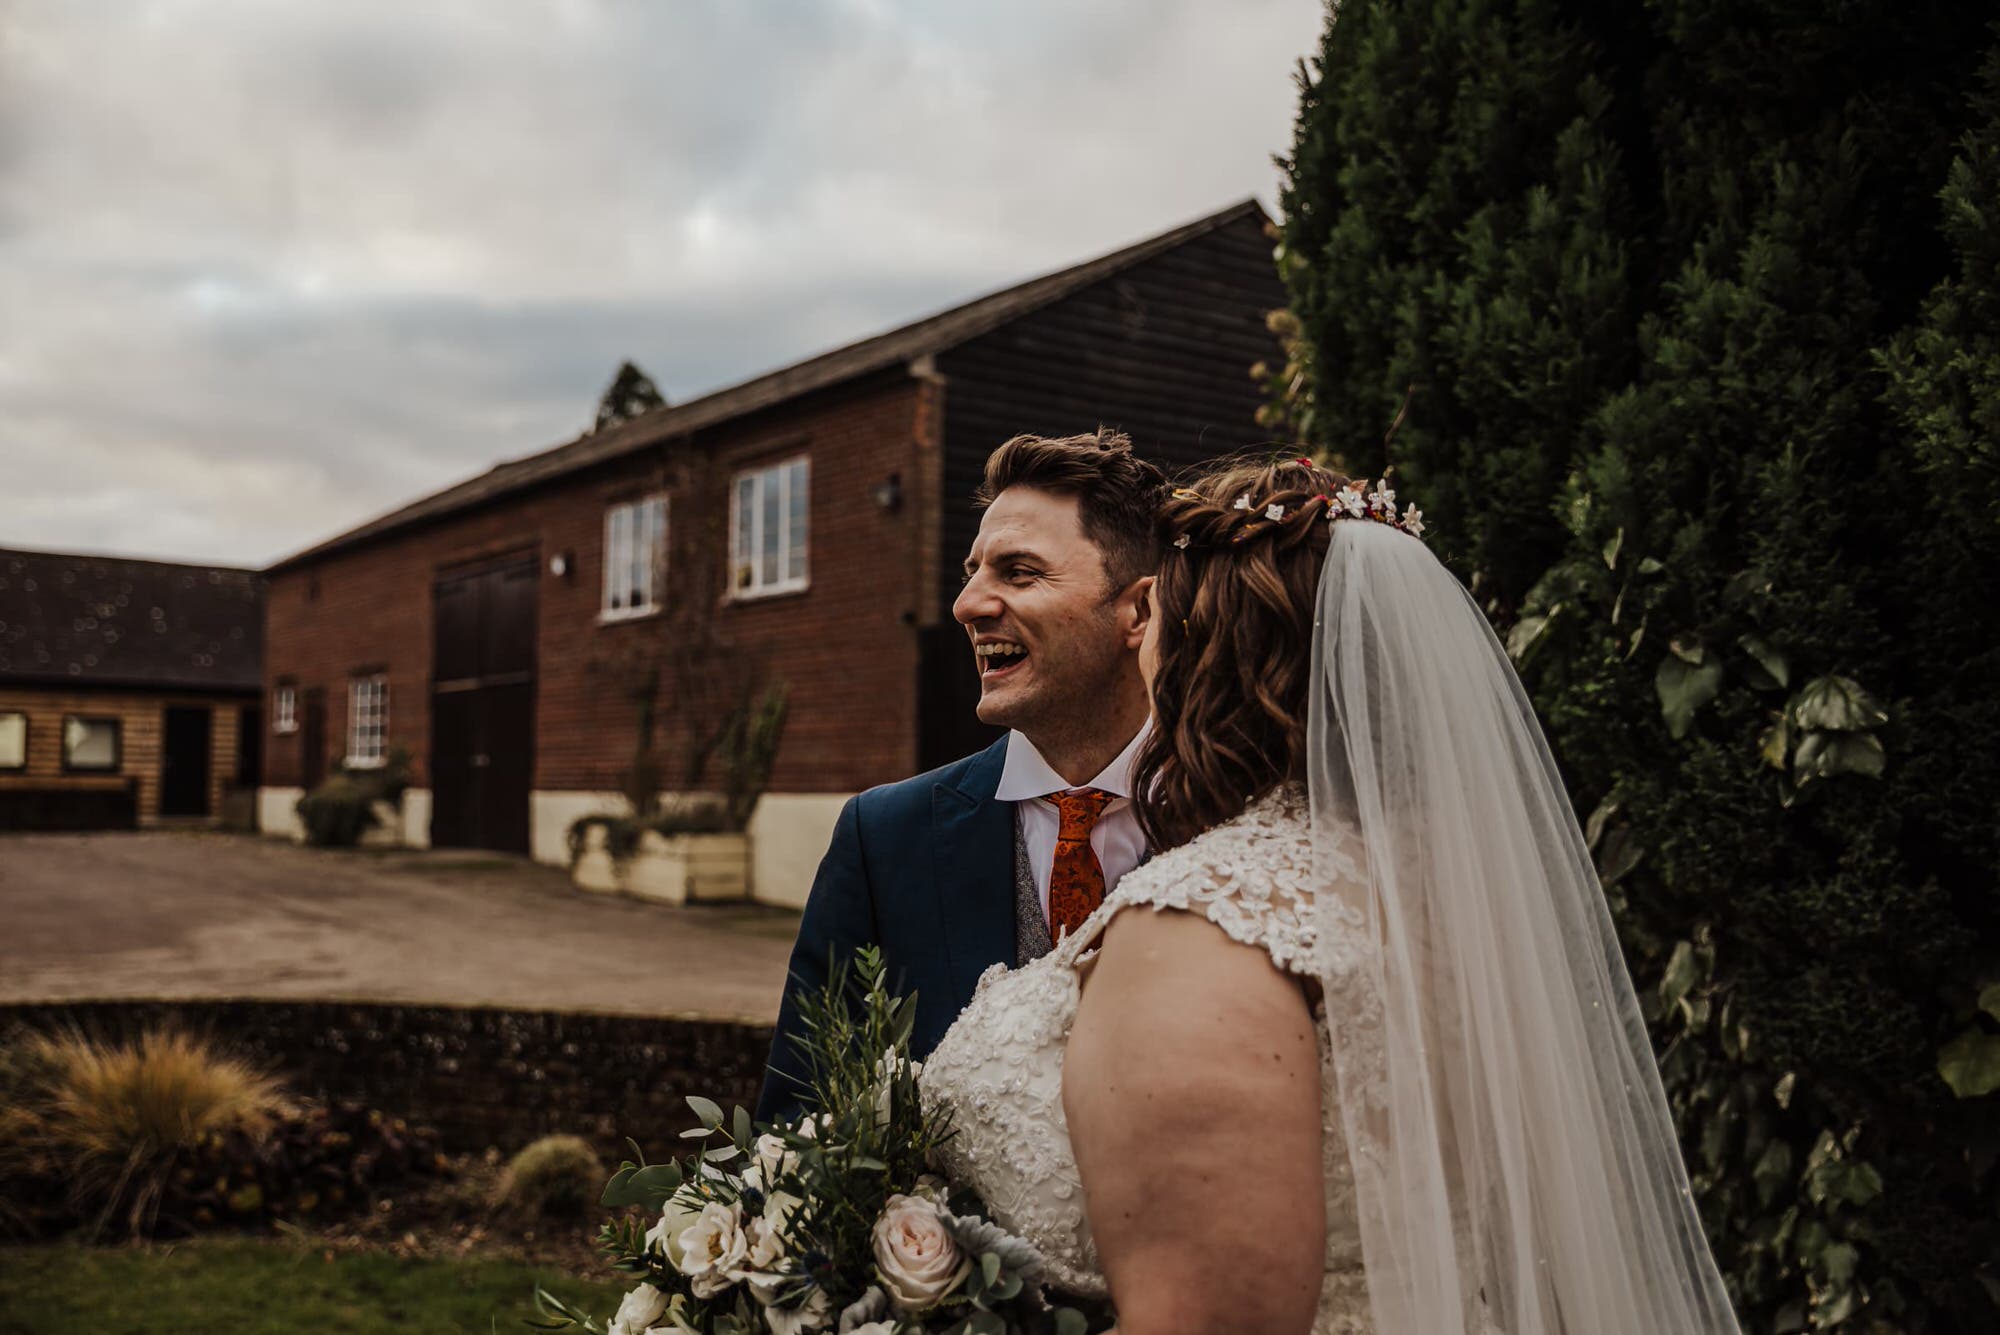 Groom and bride after the wedding ceremony Roshni photography The Milling Barn, Bluntswood Hall, Throcking wedding photographer